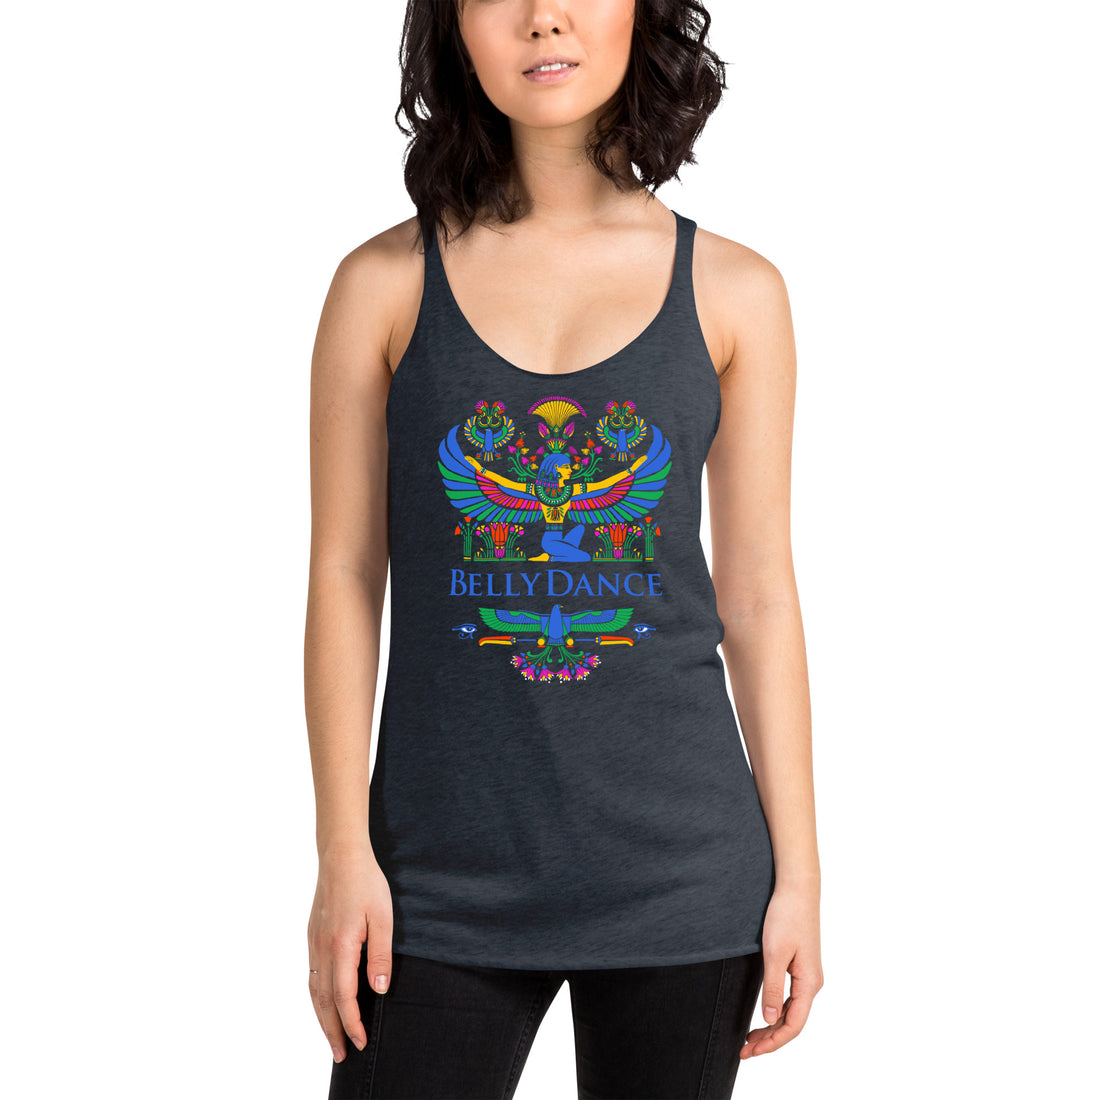 Goddess Isis Ancient Egypt Belly Dance Tank Top  -  a gift for a dance lover, dancer, belly dancing